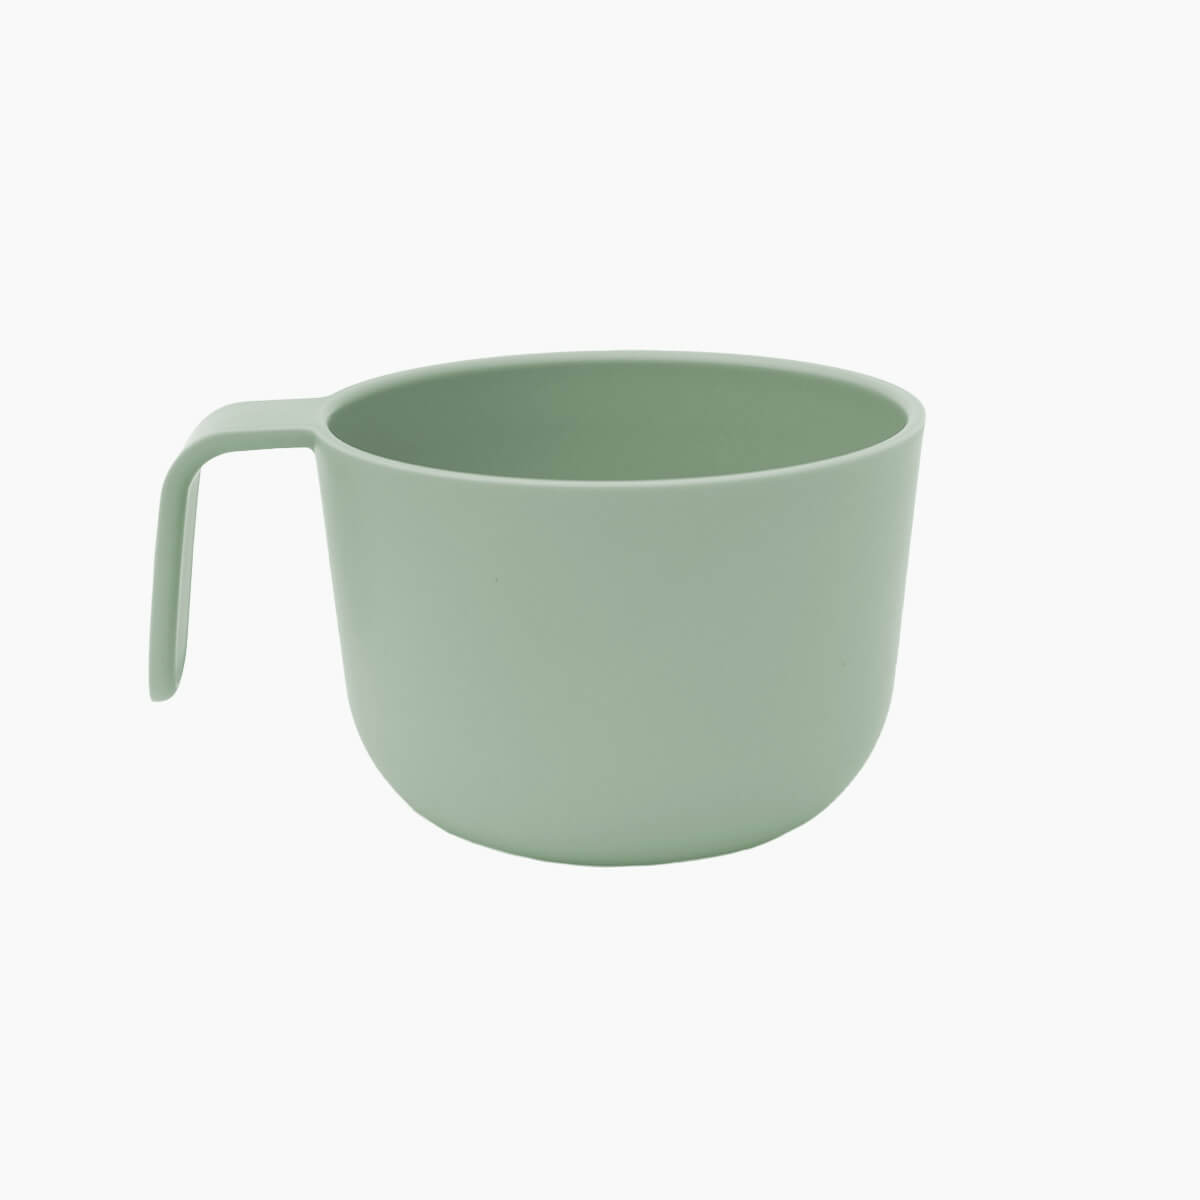 Snack Bowl in Sage / ezpz Basics Line / Bowl with Handle and Lid for Kids